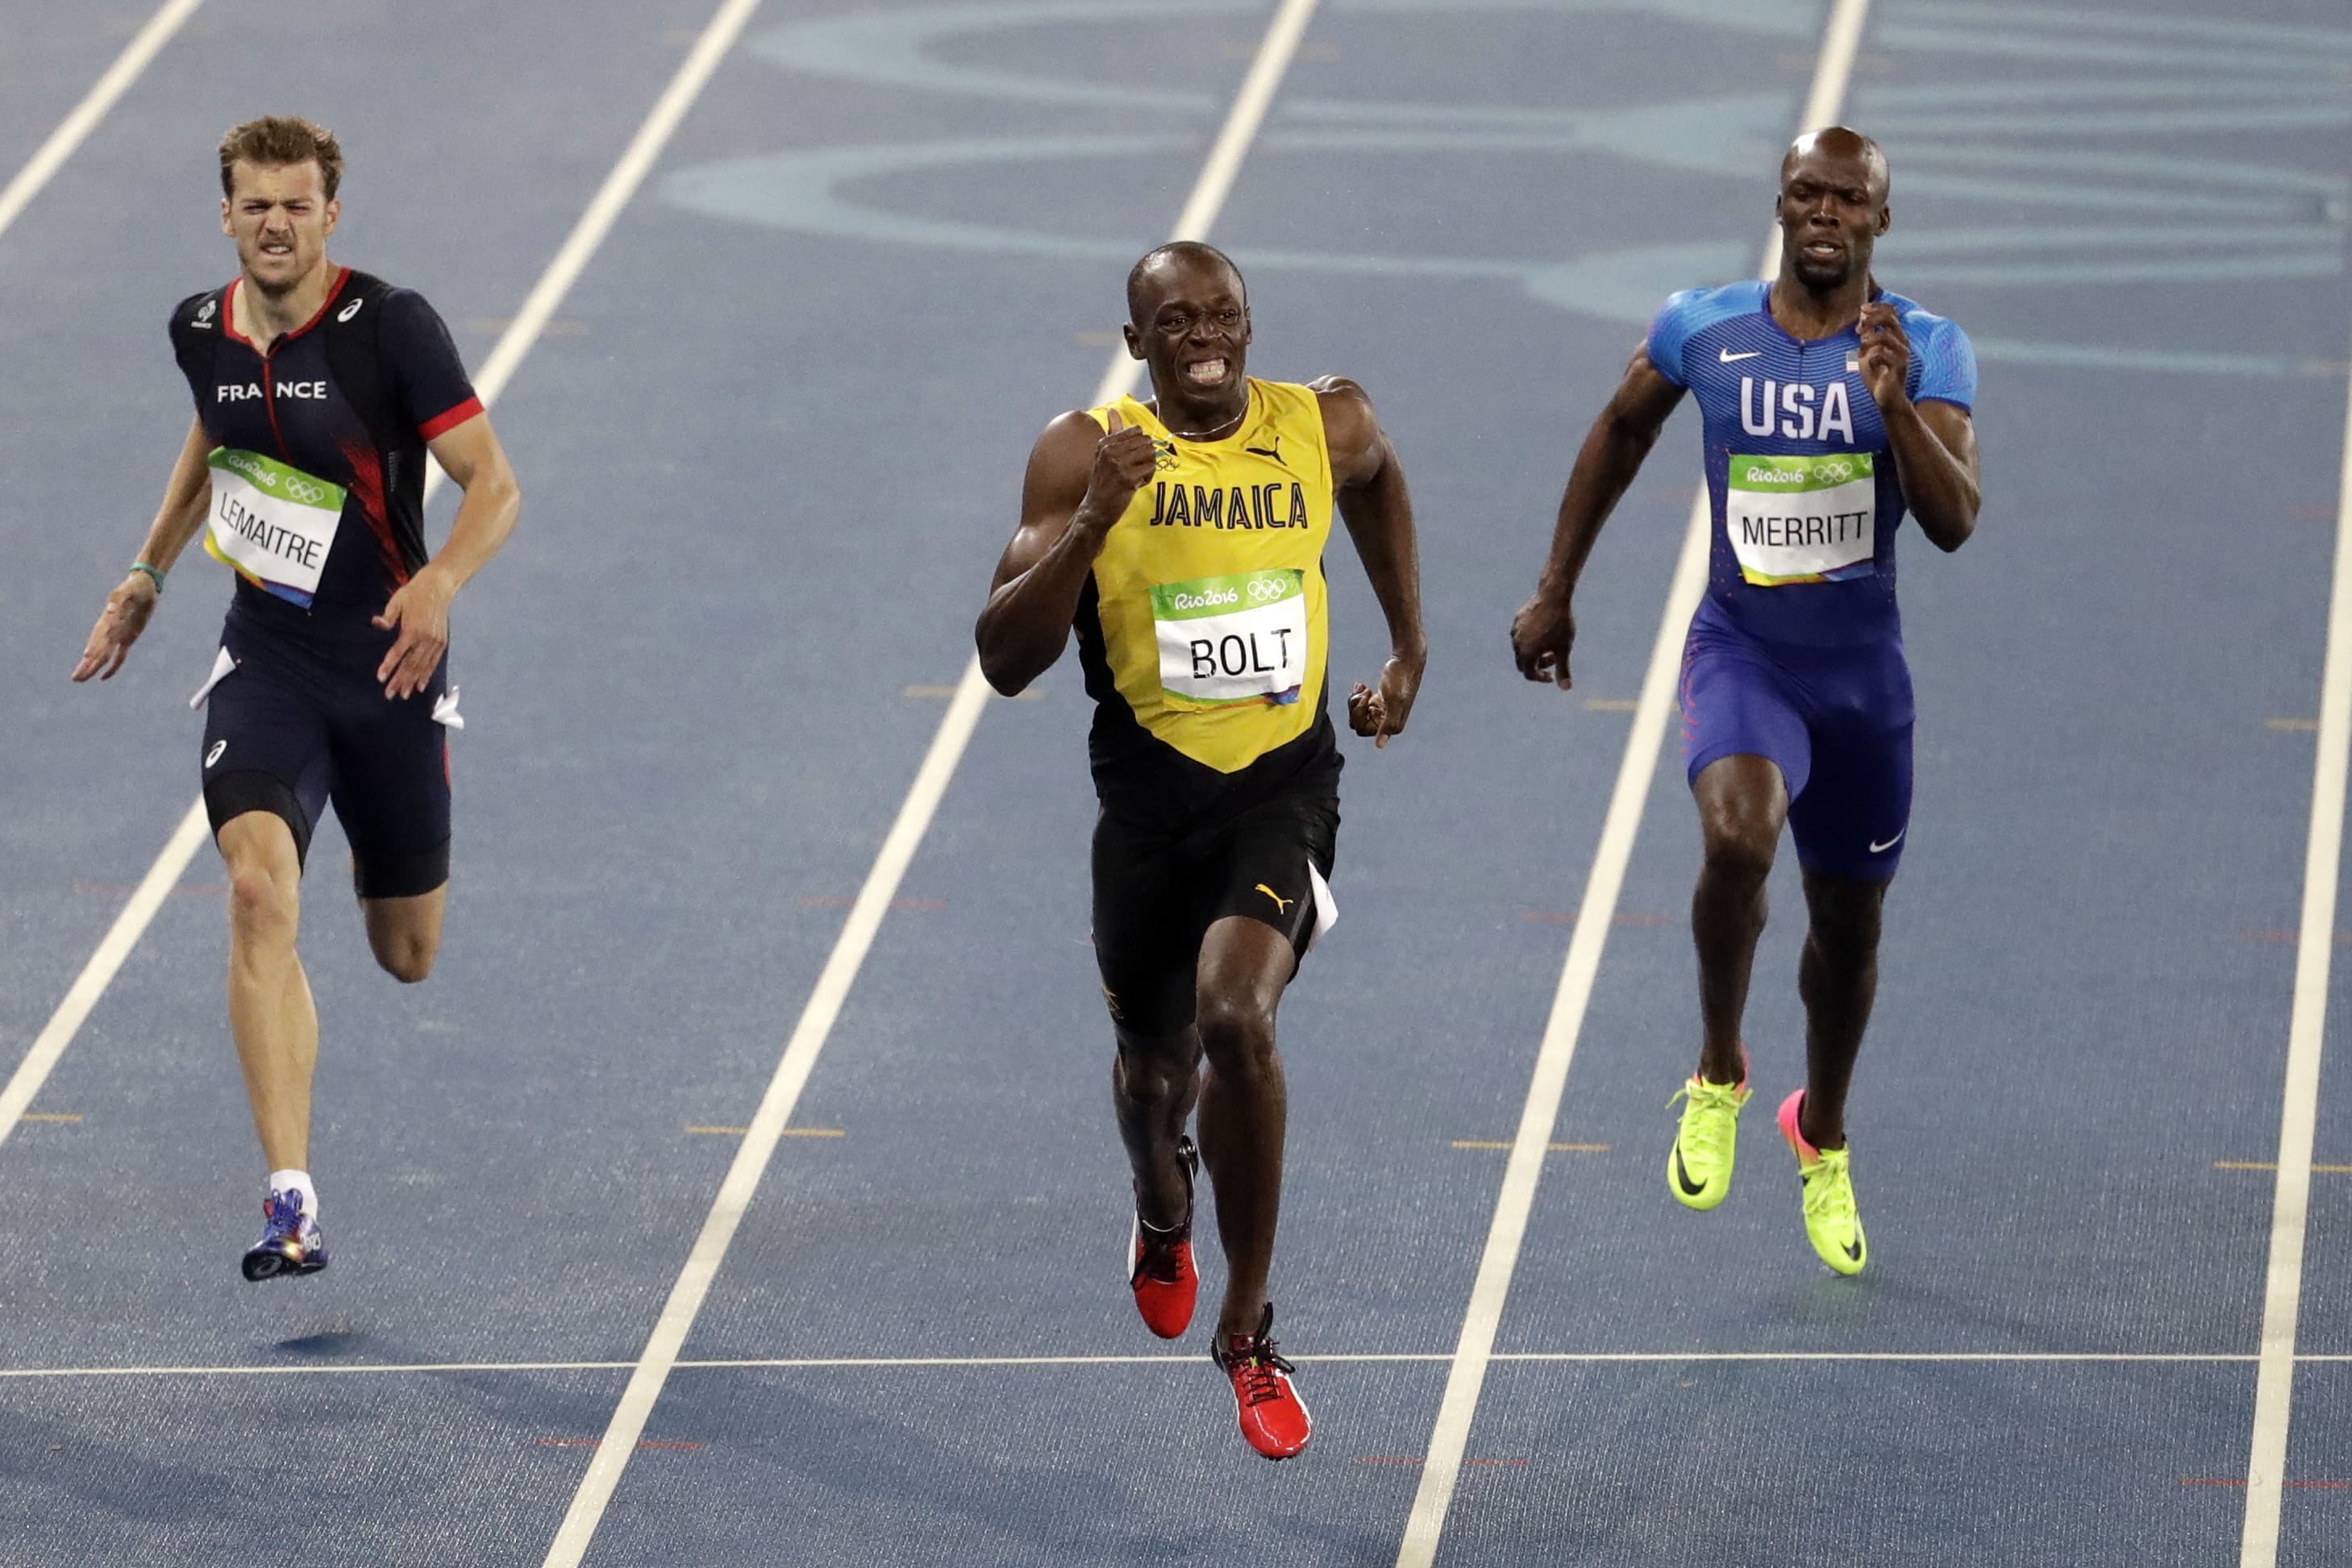 Usain Bolt from Jamaica, center, wins the gold medal in the men's 200-meter final during the athletics competitions of the 2016 Summer Olympics at the Olympic stadium in Rio de Janeiro, Brazil, Thursday, Aug. 18, 2016.